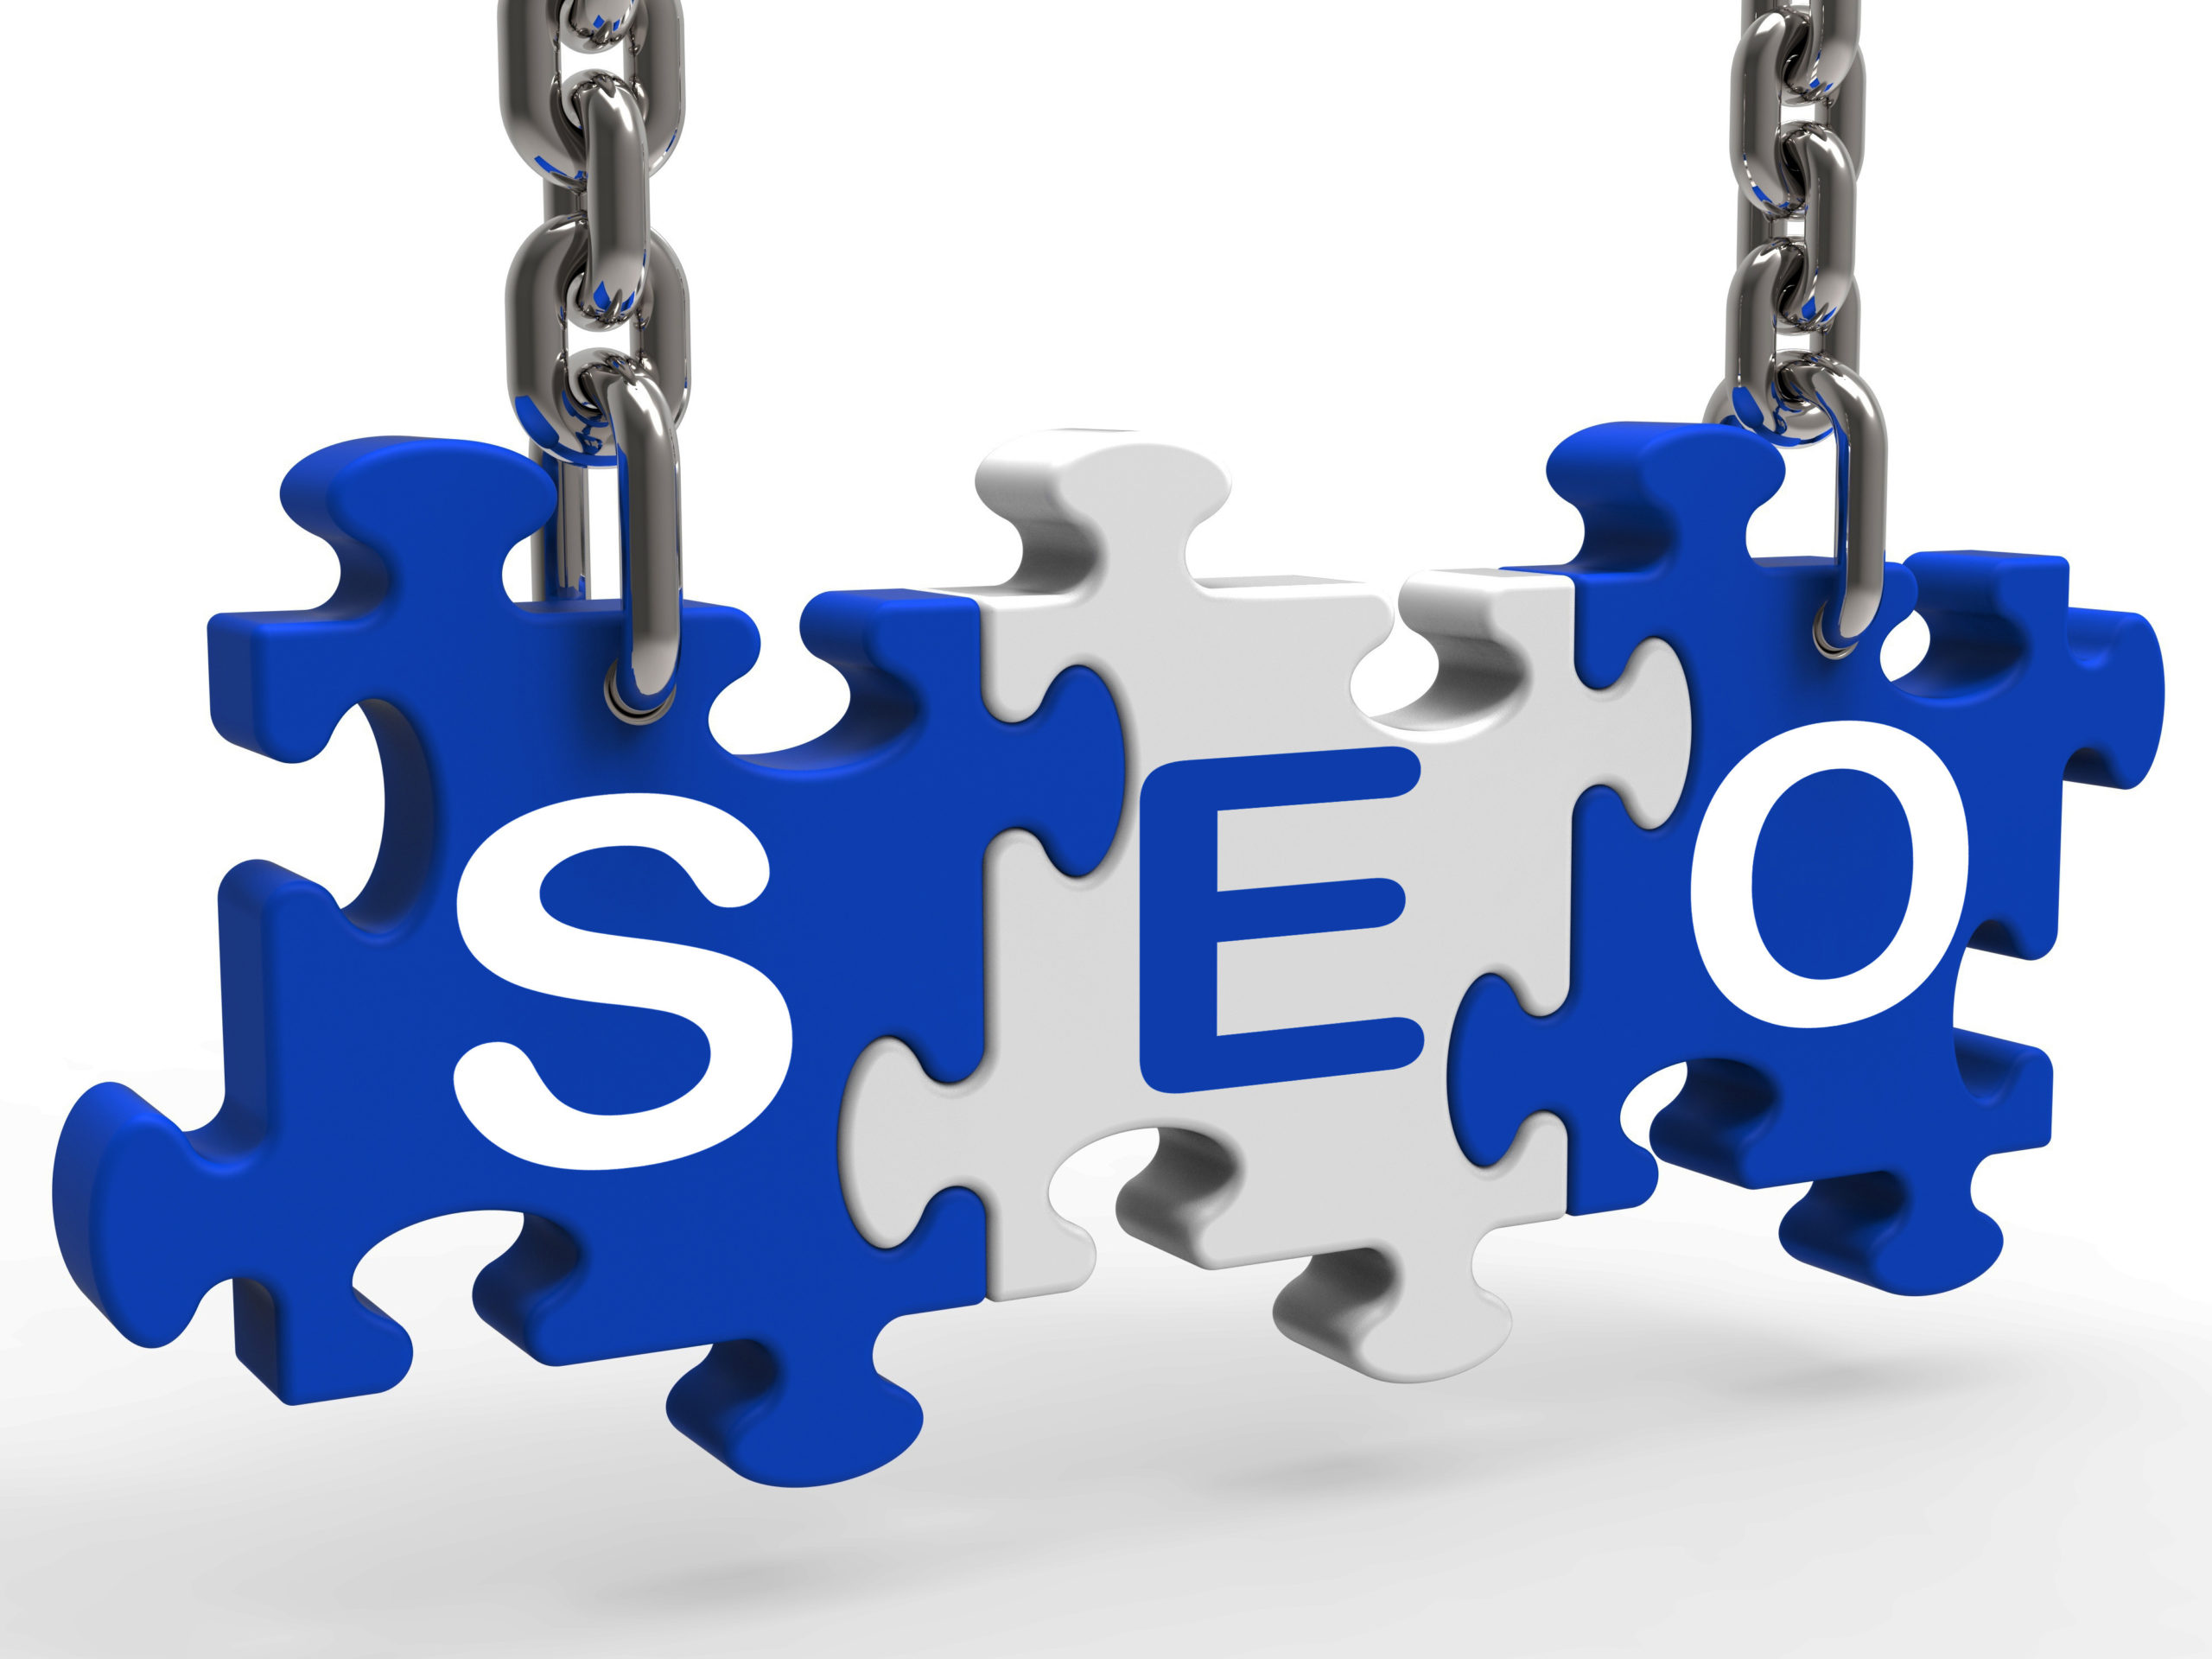 Search-engine-optimization-how-to-do-it-yourself